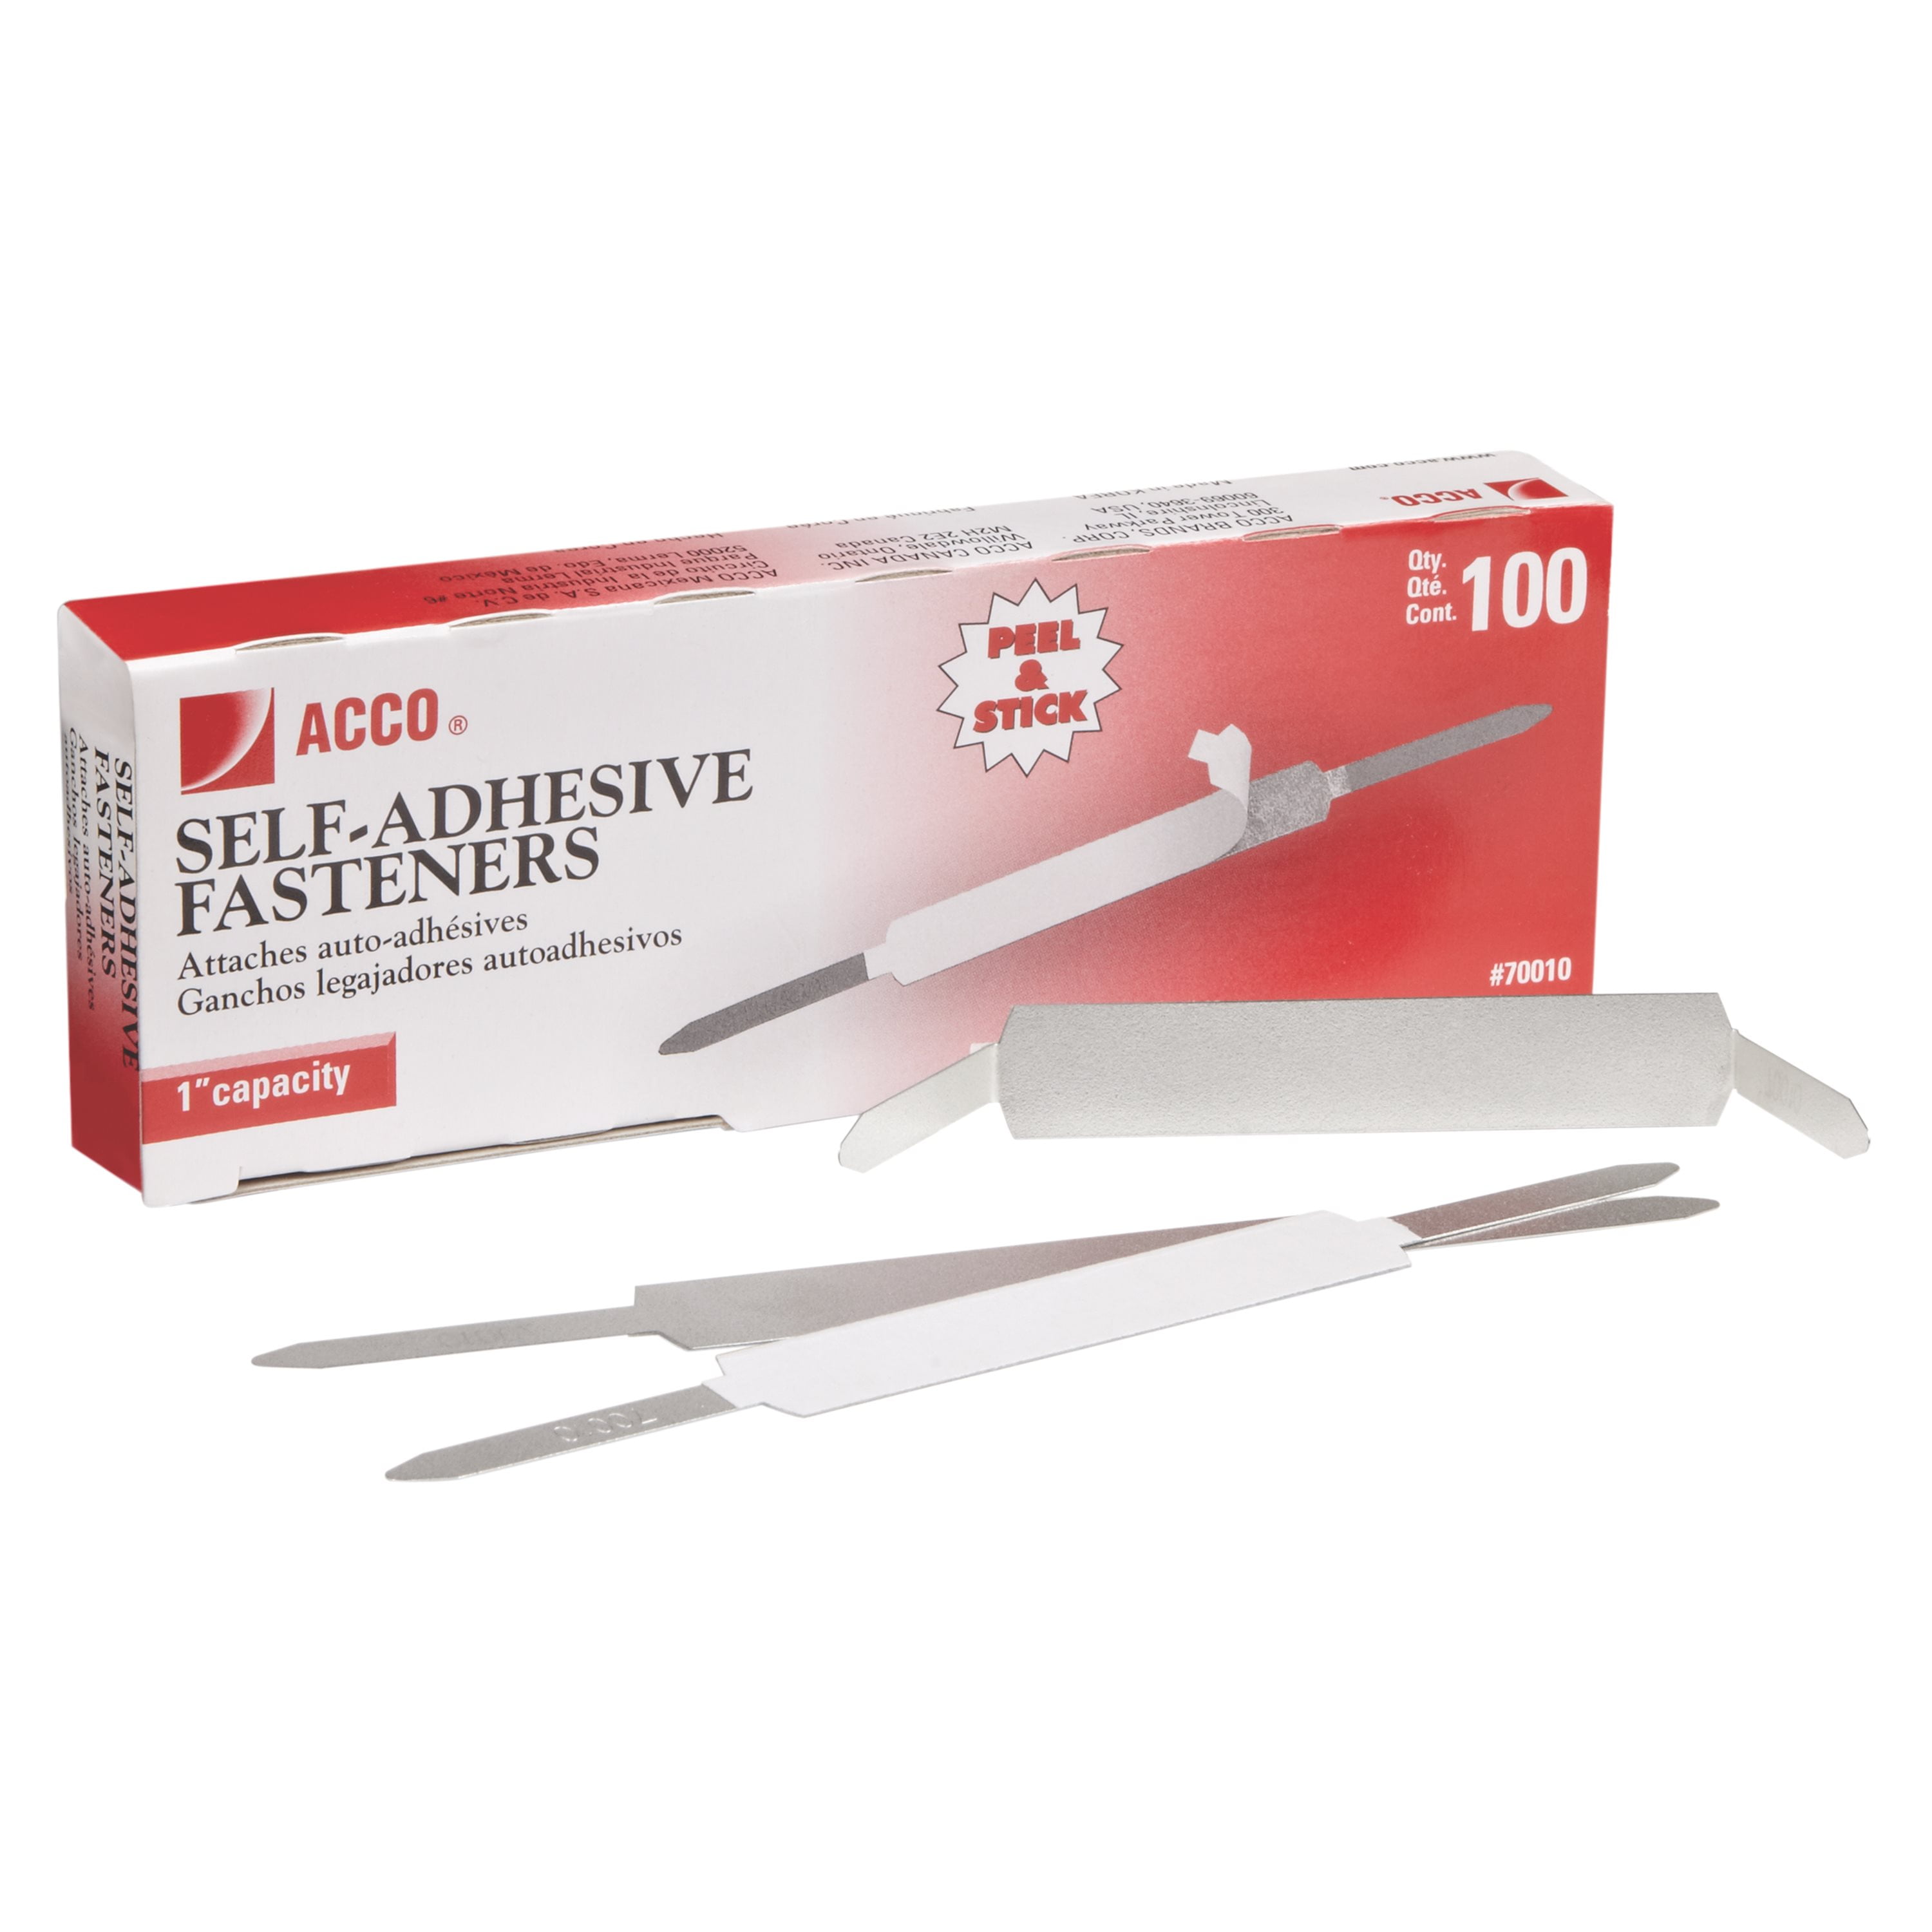 1" Capacity  50 ct LOT OF 3 ACCO Self-Adhesive Paper Document File Fasteners 